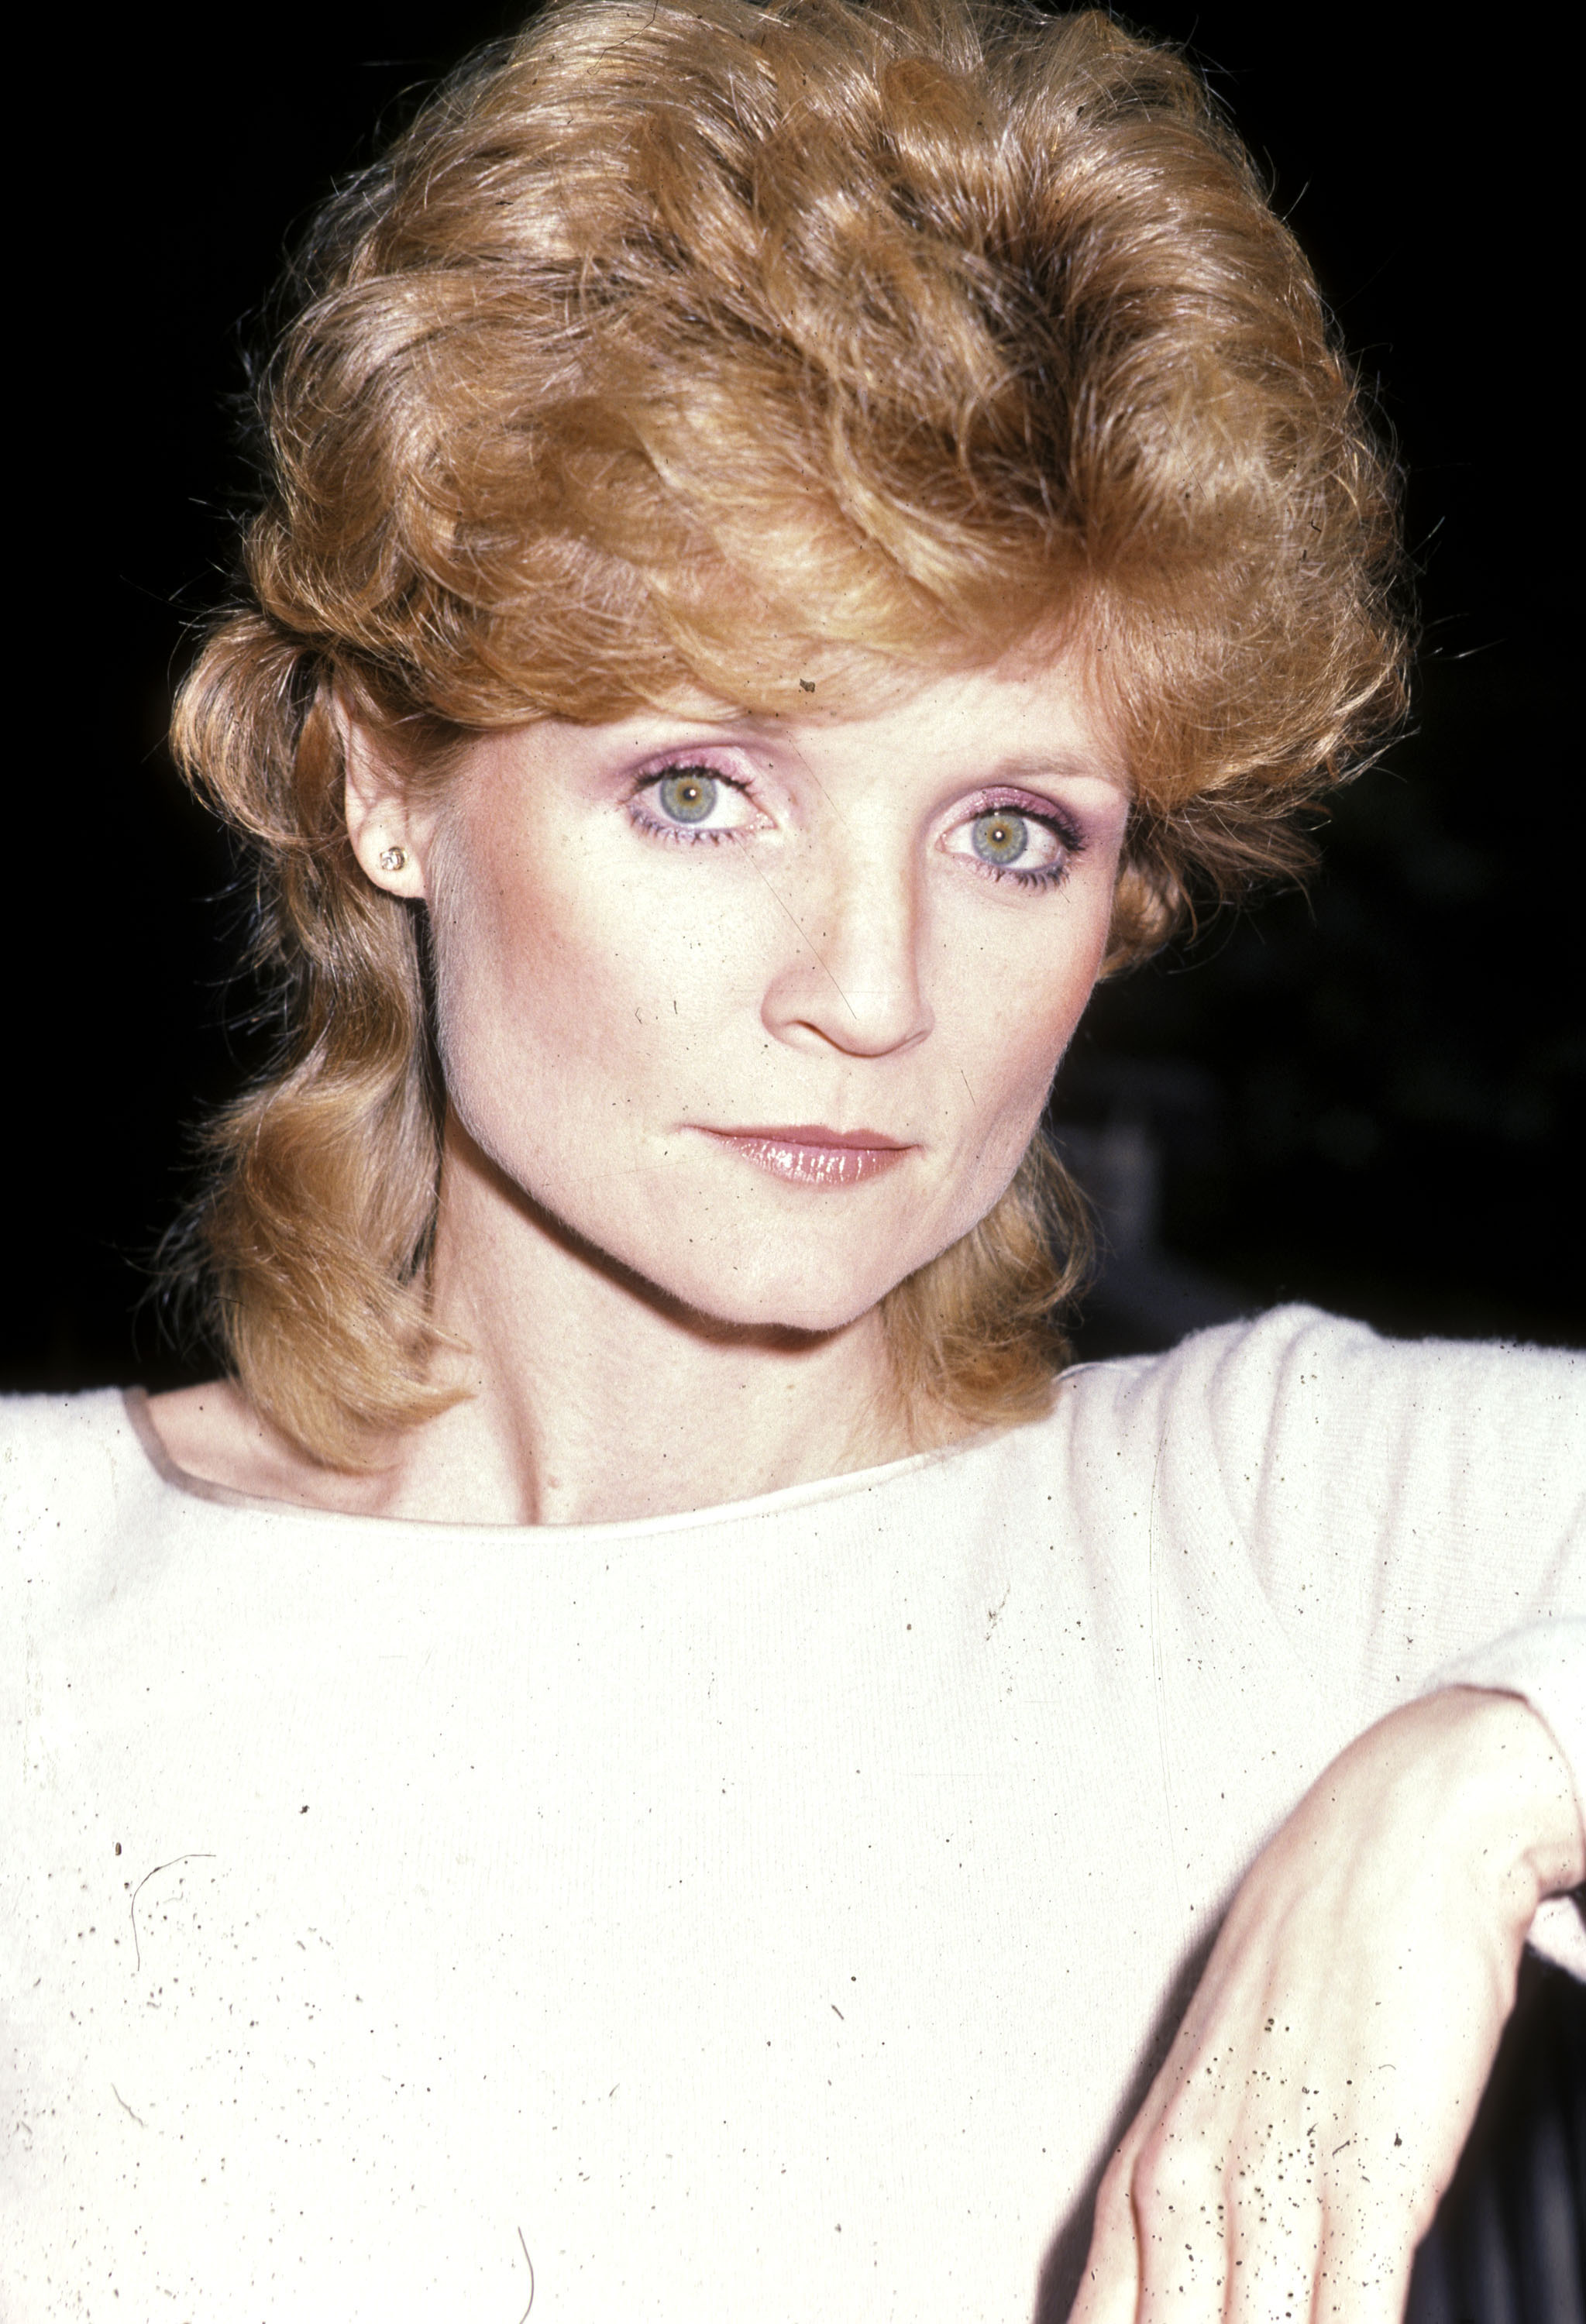 Constance McCashin poses for an exclusive photo session at her home in Los Angeles, California, on November 30, 1983. | Source: Getty Images